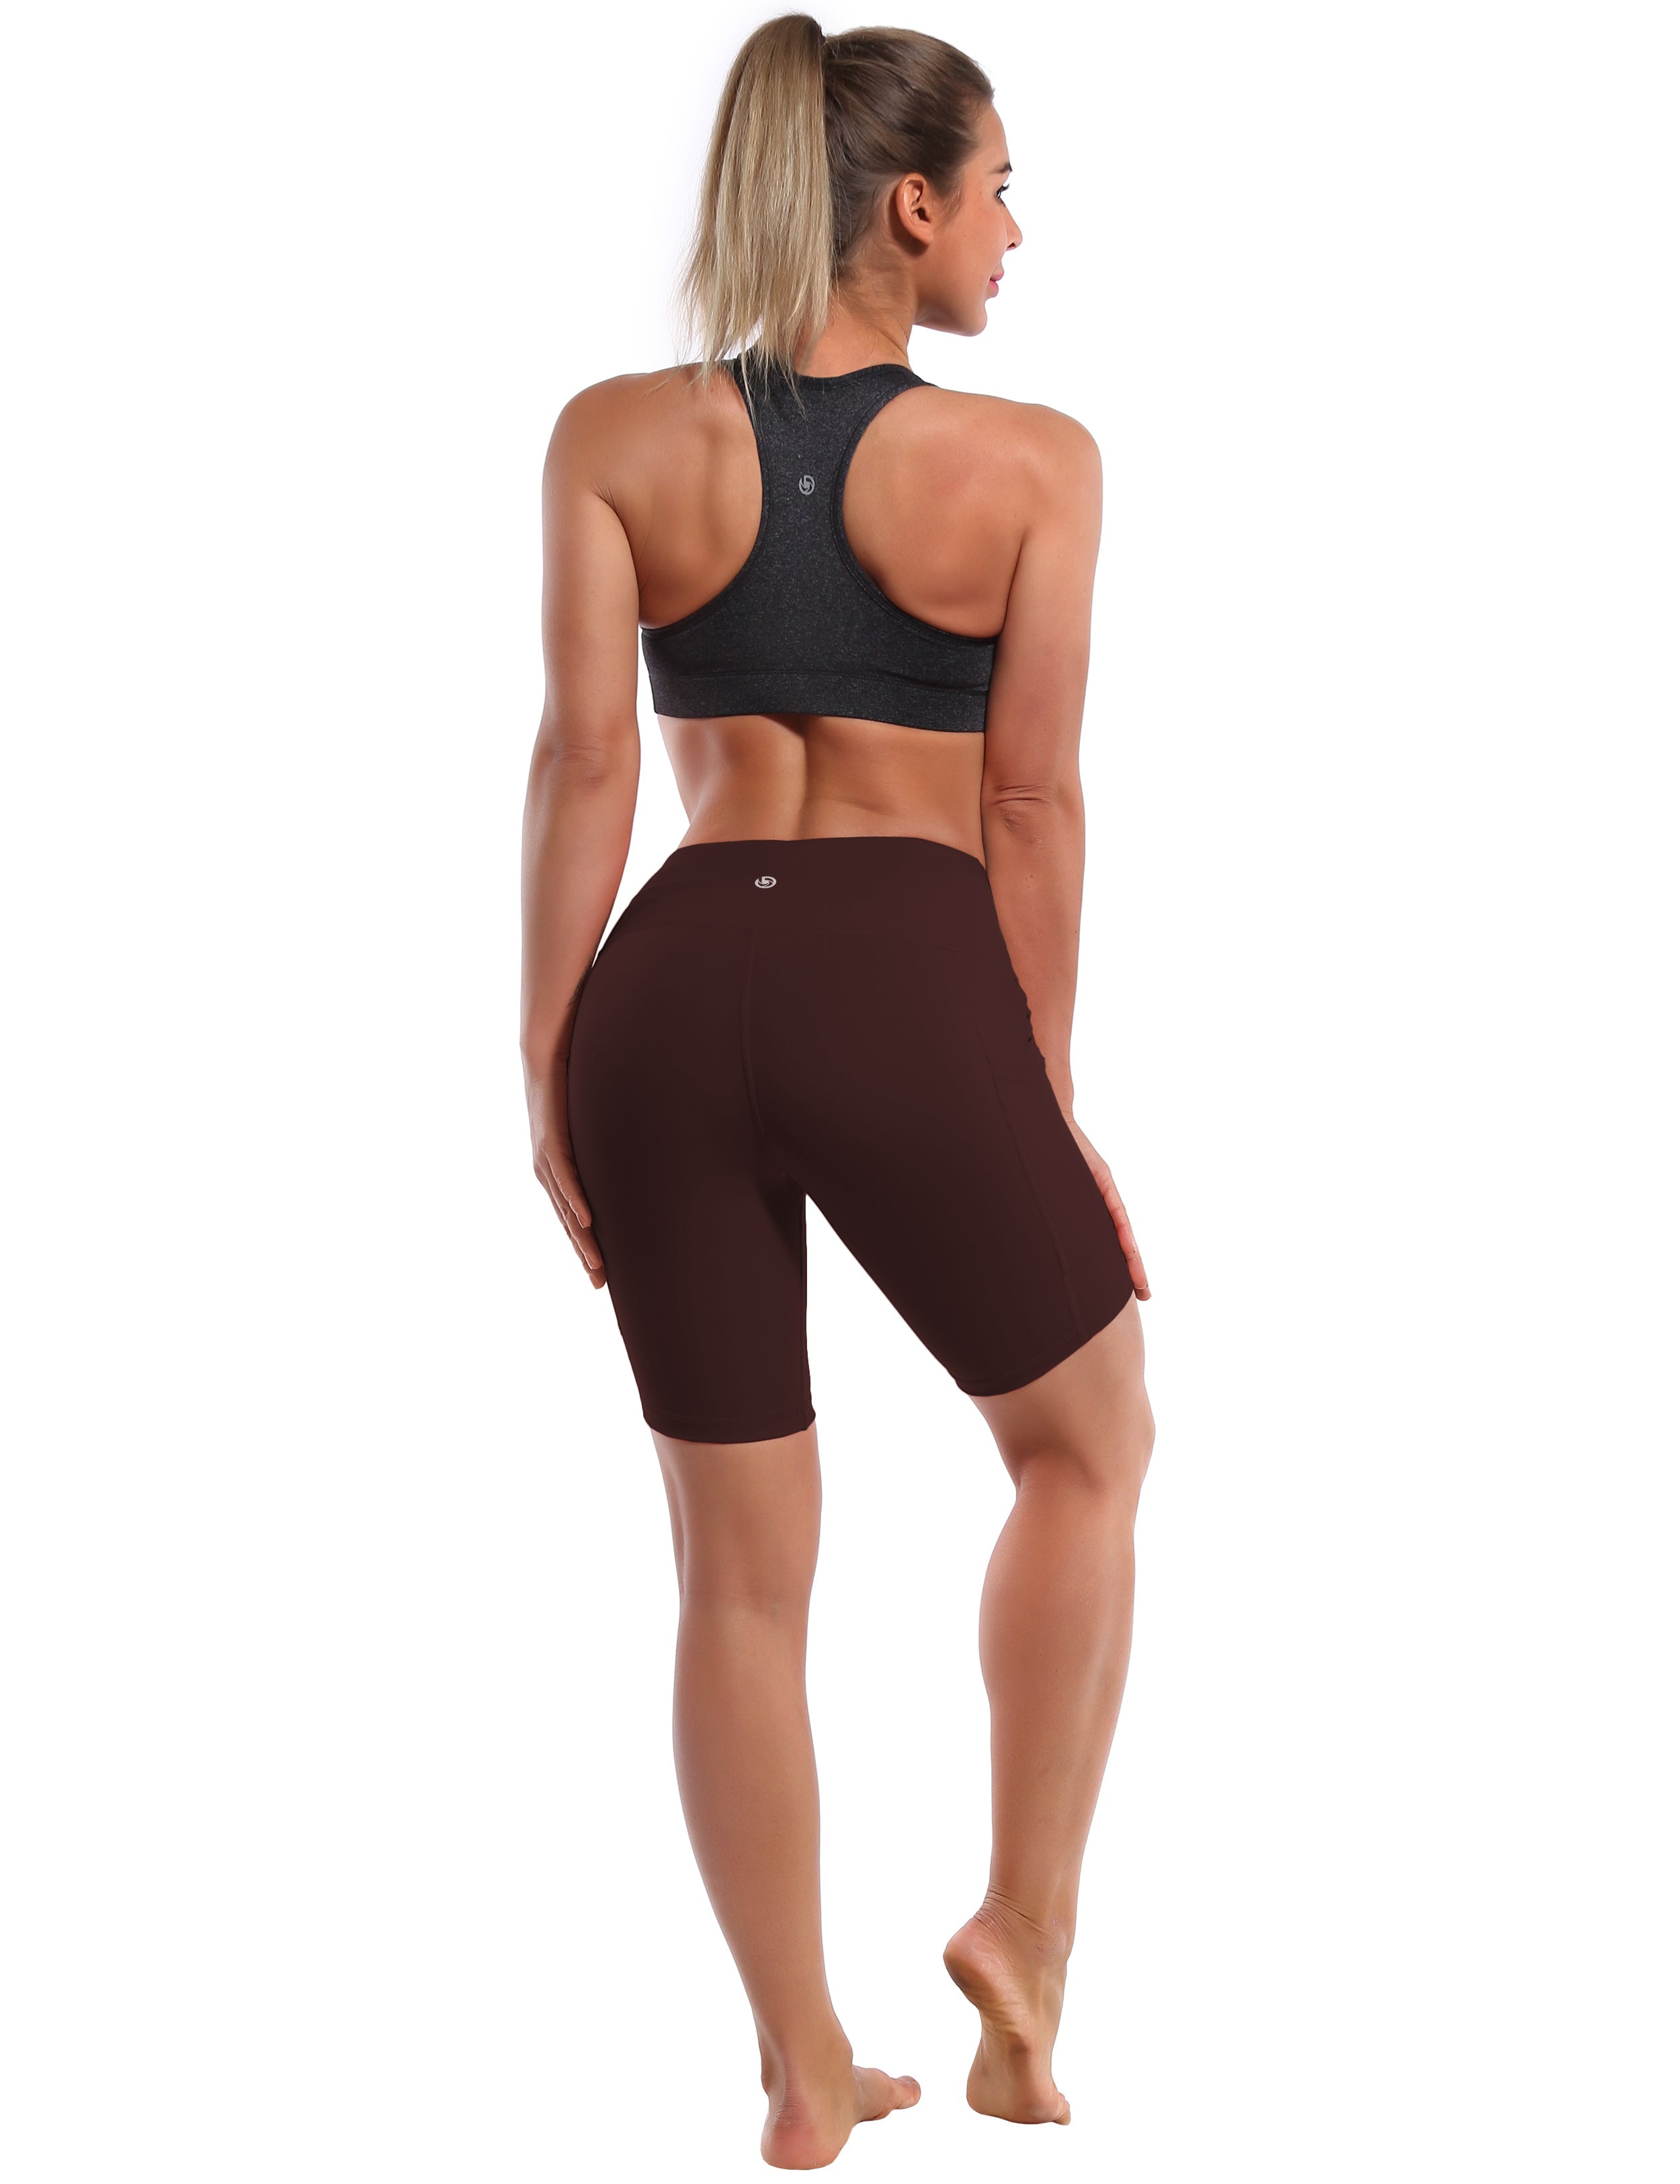 8" Side Pockets Pilates Shorts mahoganymaroon Sleek, soft, smooth and totally comfortable: our newest style is here. Softest-ever fabric High elasticity High density 4-way stretch Fabric doesn't attract lint easily No see-through Moisture-wicking Machine wash 75% Nylon, 25% Spandex